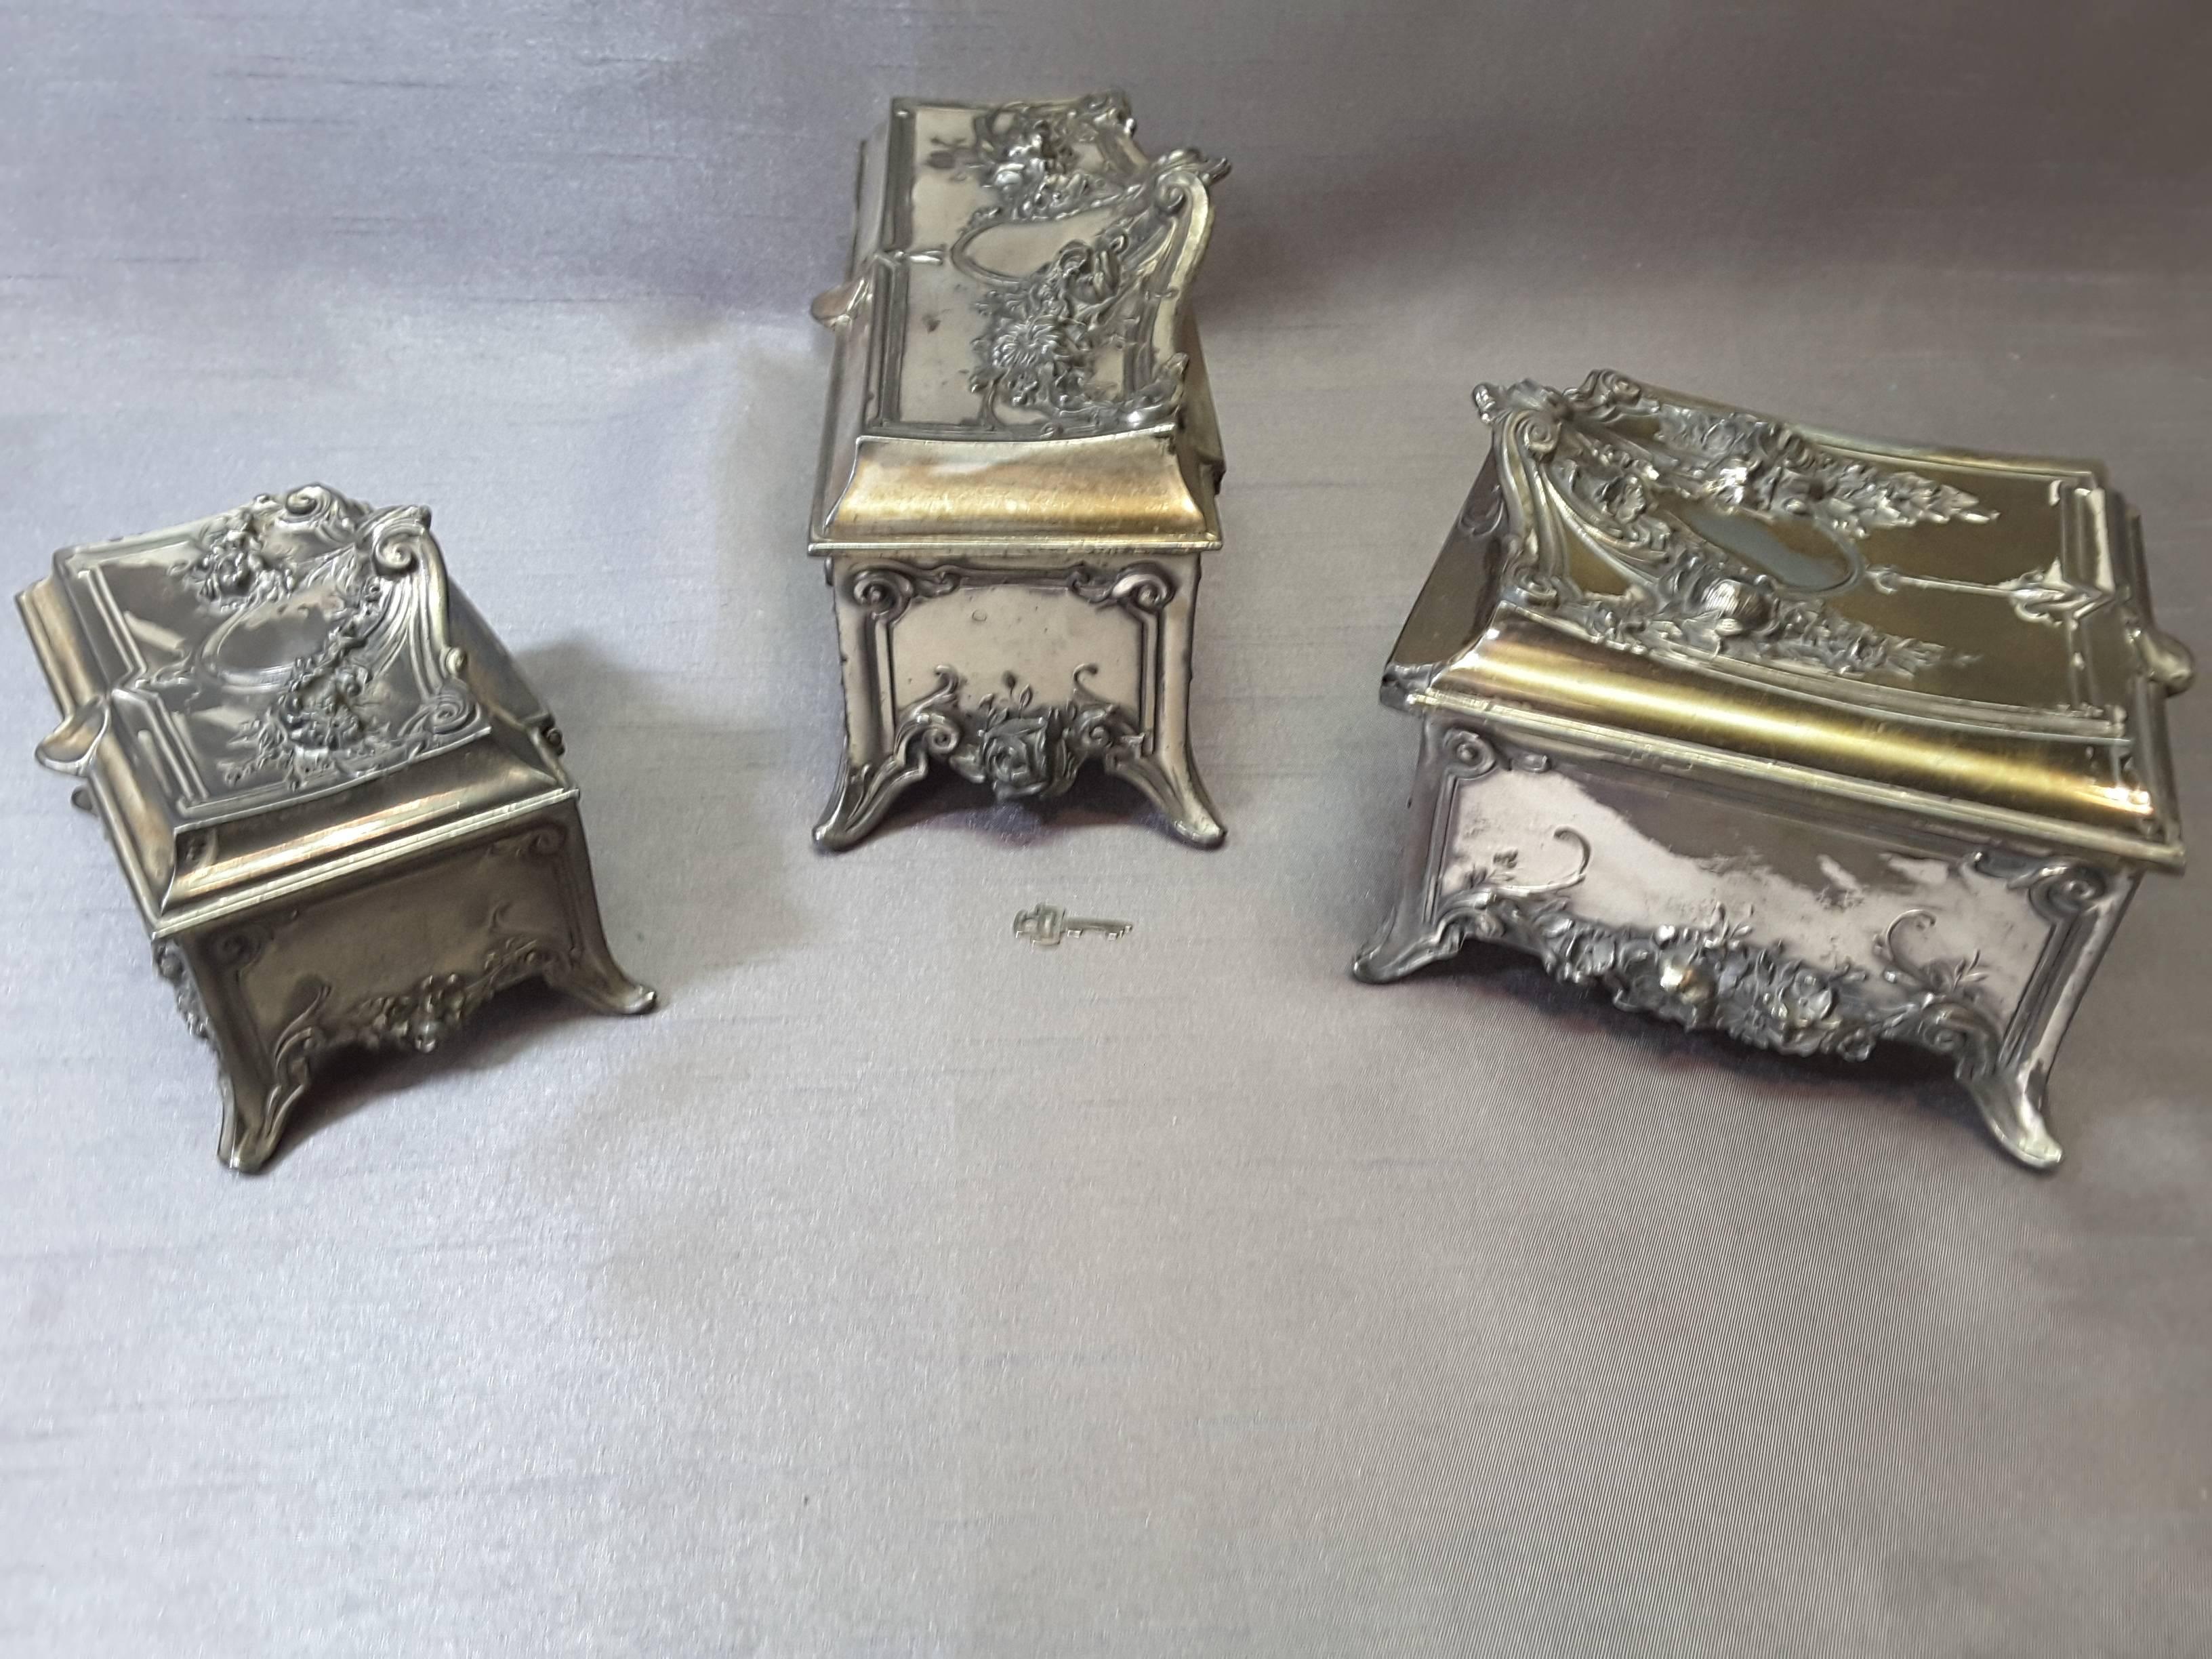  Art Nouveau Pewter Jewelry Caskets by W.B. Mfg. Co./Weidlich Bros. In Good Condition For Sale In Ottawa, Ontario